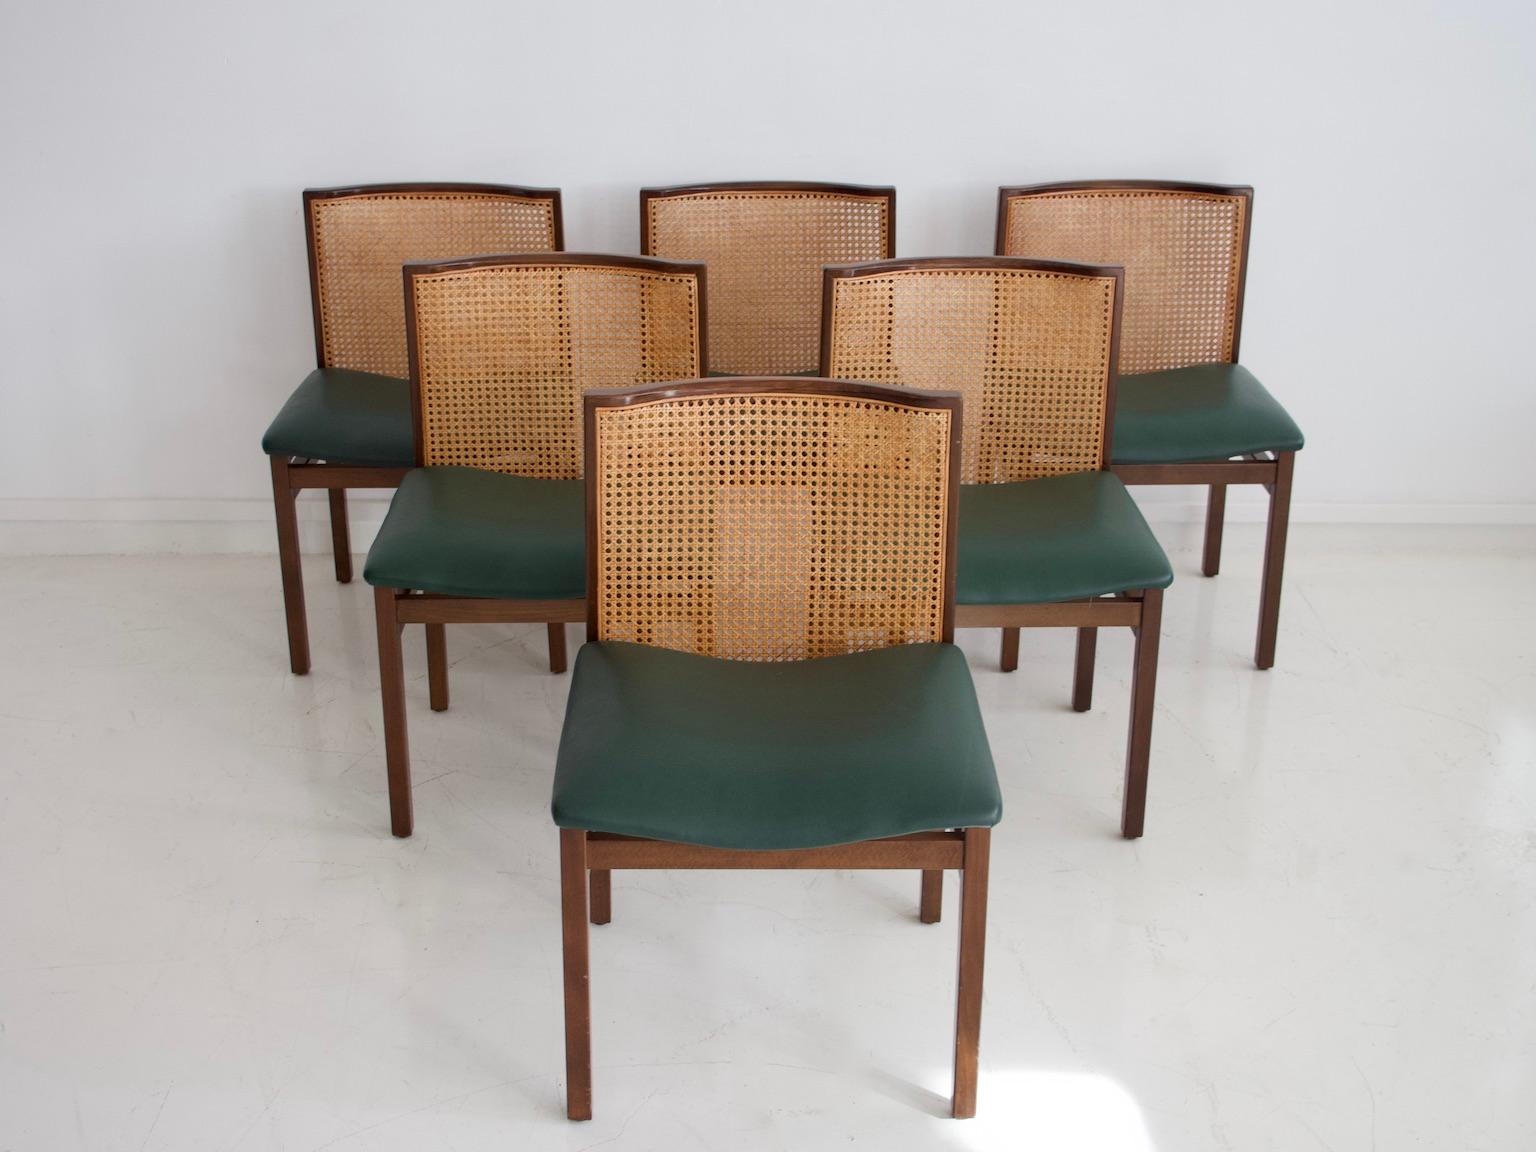 Six chairs with wooden frame, forest green leather seat and cane back by Tito Agnoli. Manufactured in Italy, circa 1957.

Literature: Giuliana Gramigna, 